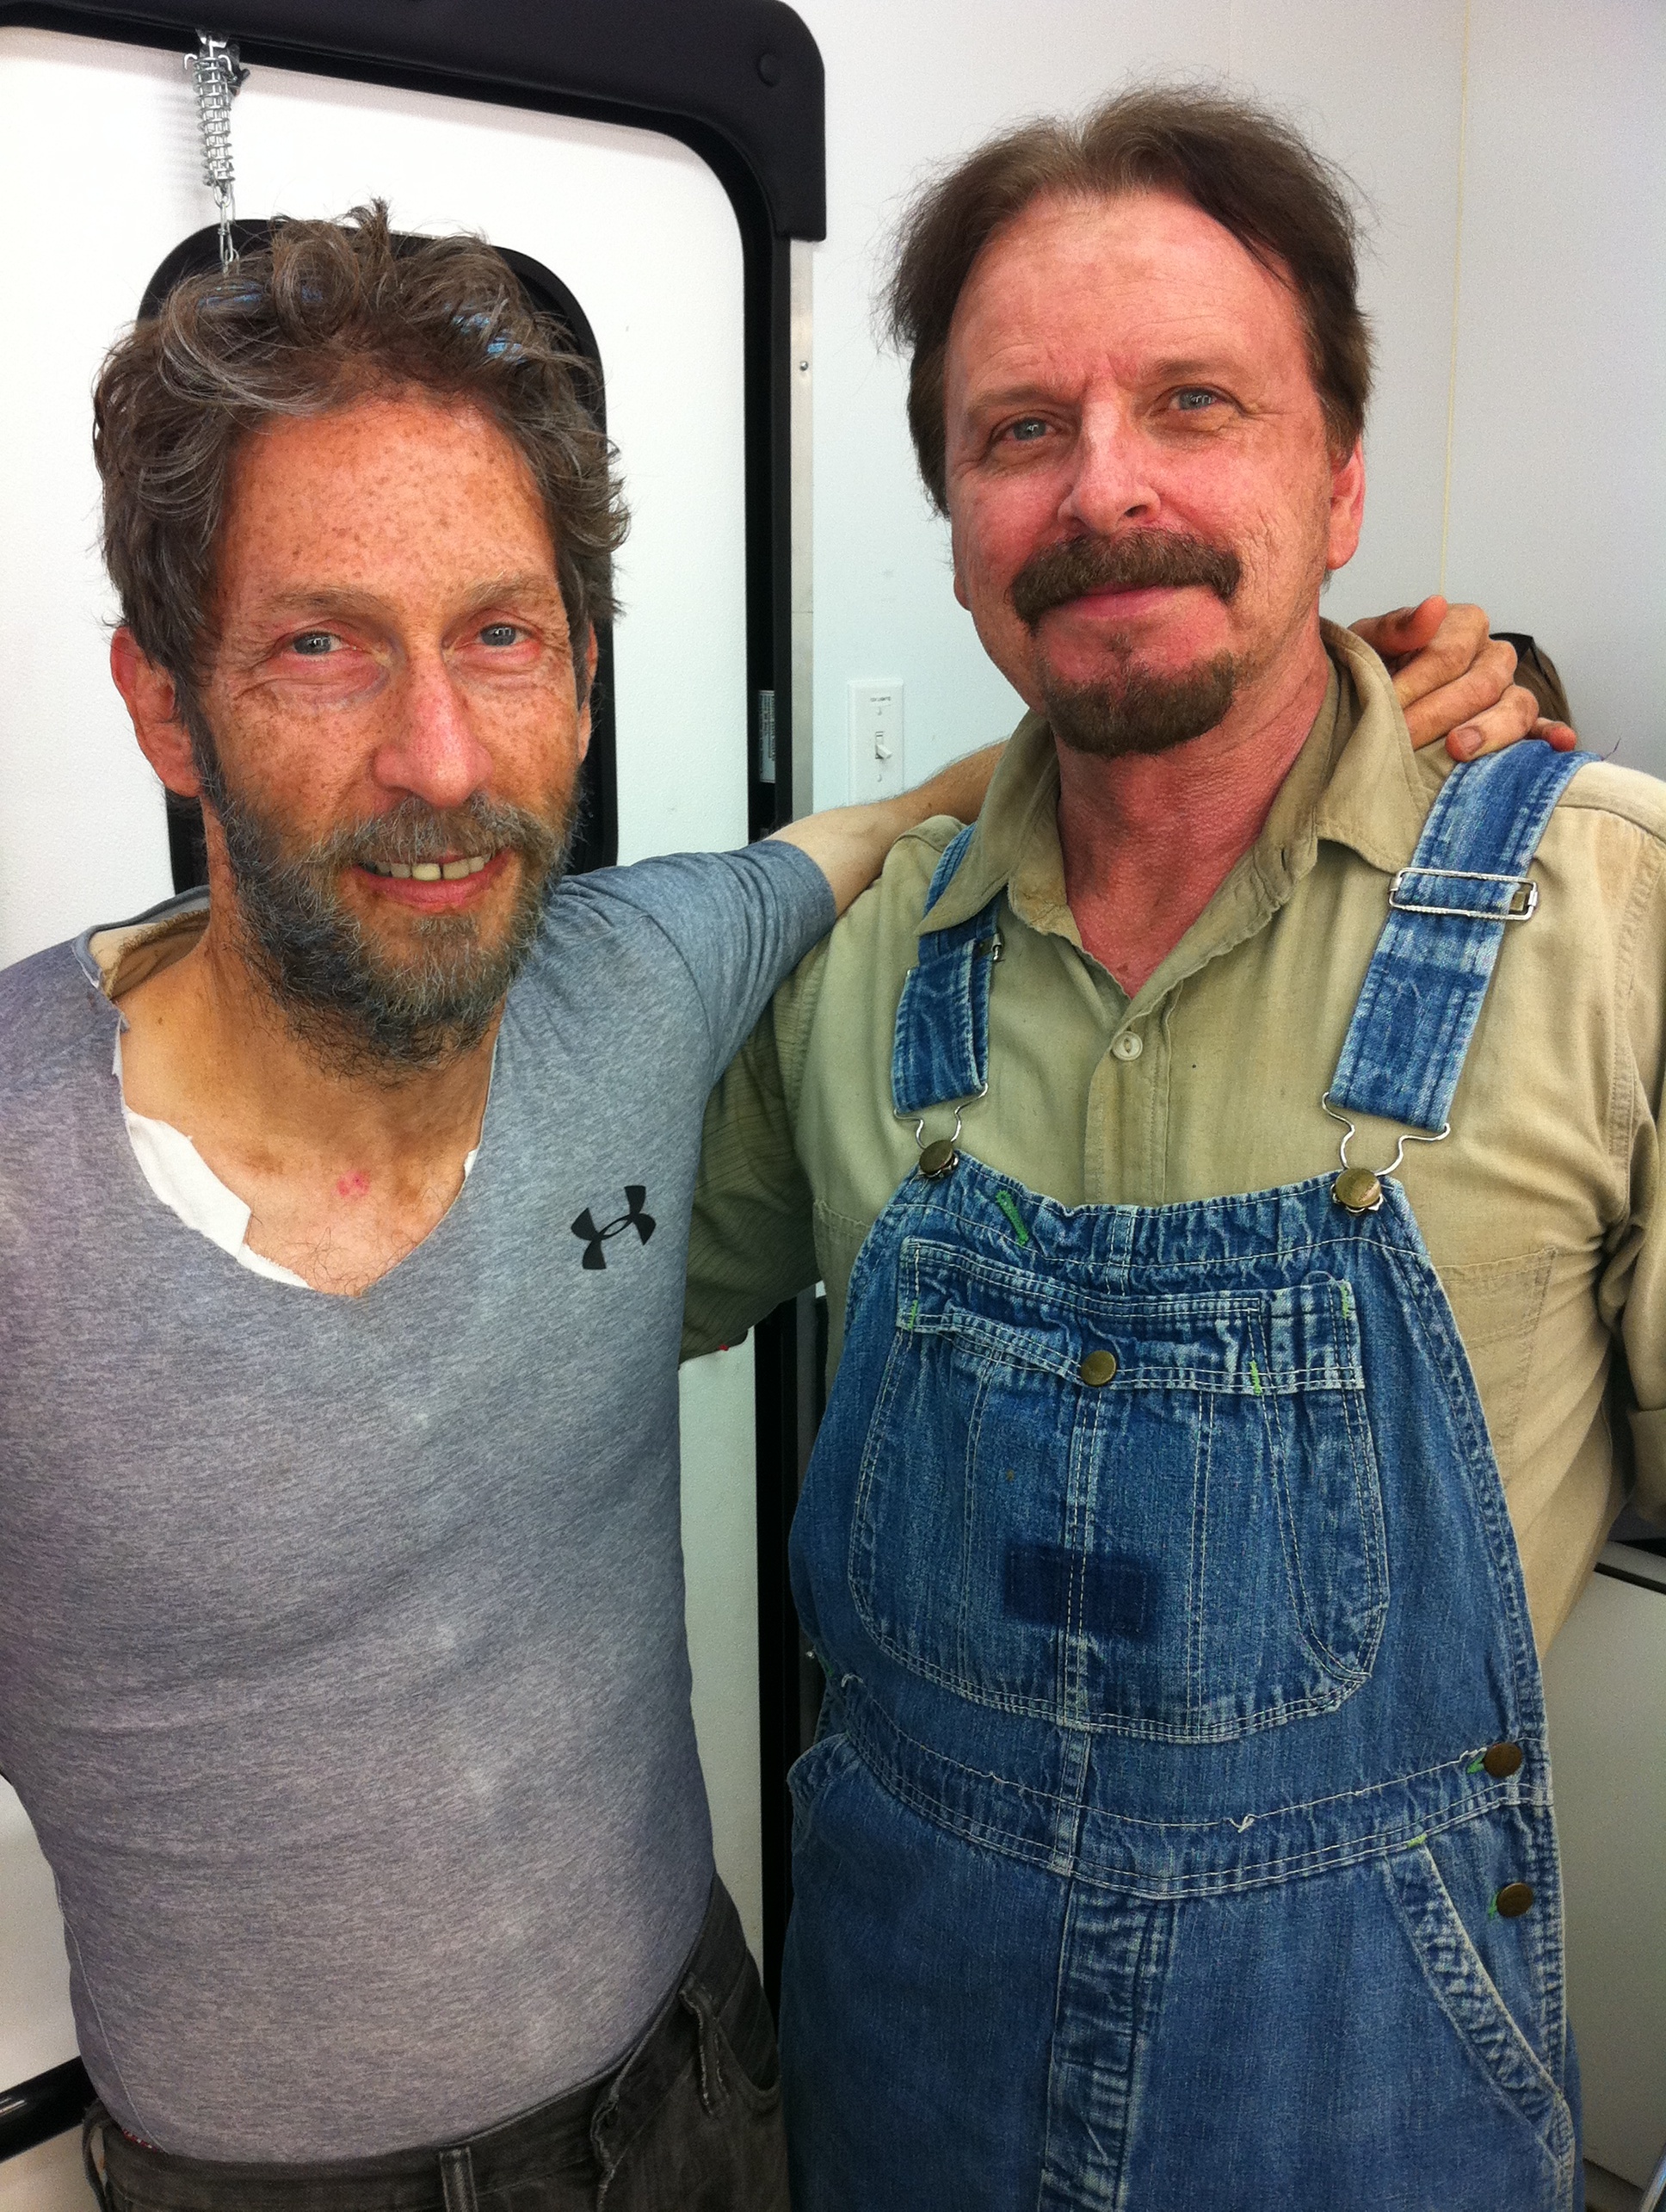 In the make-up trailer with Tim Blake Nelson. In full make-up and wardrobe for shooting a scene for AILD (2012)